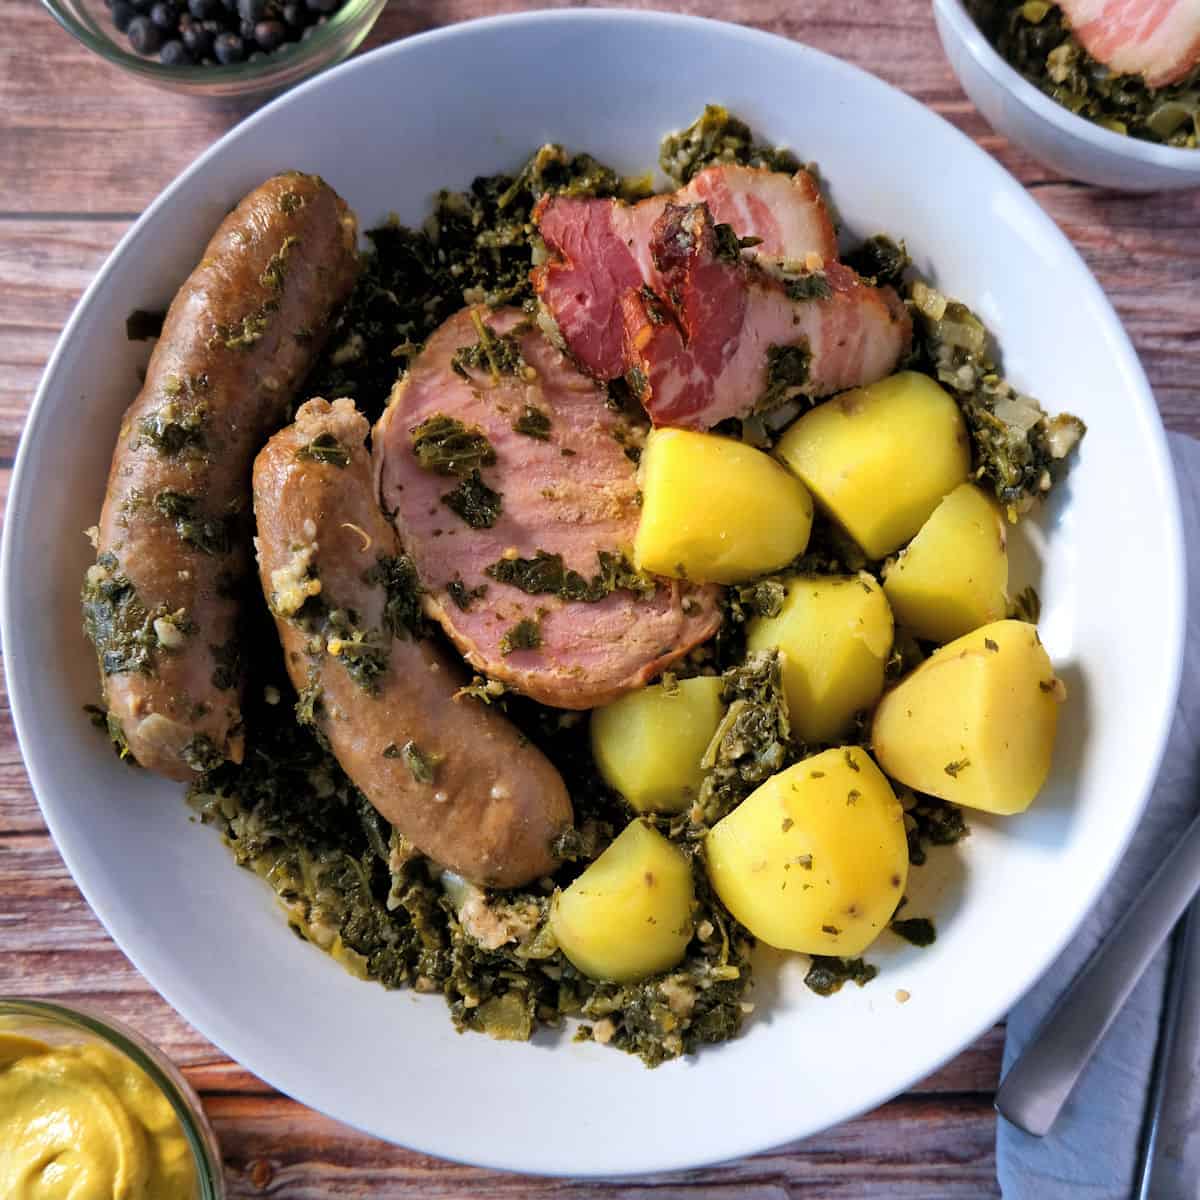 Kale with Pinkel and Kassler and Pork Belly and potatoes